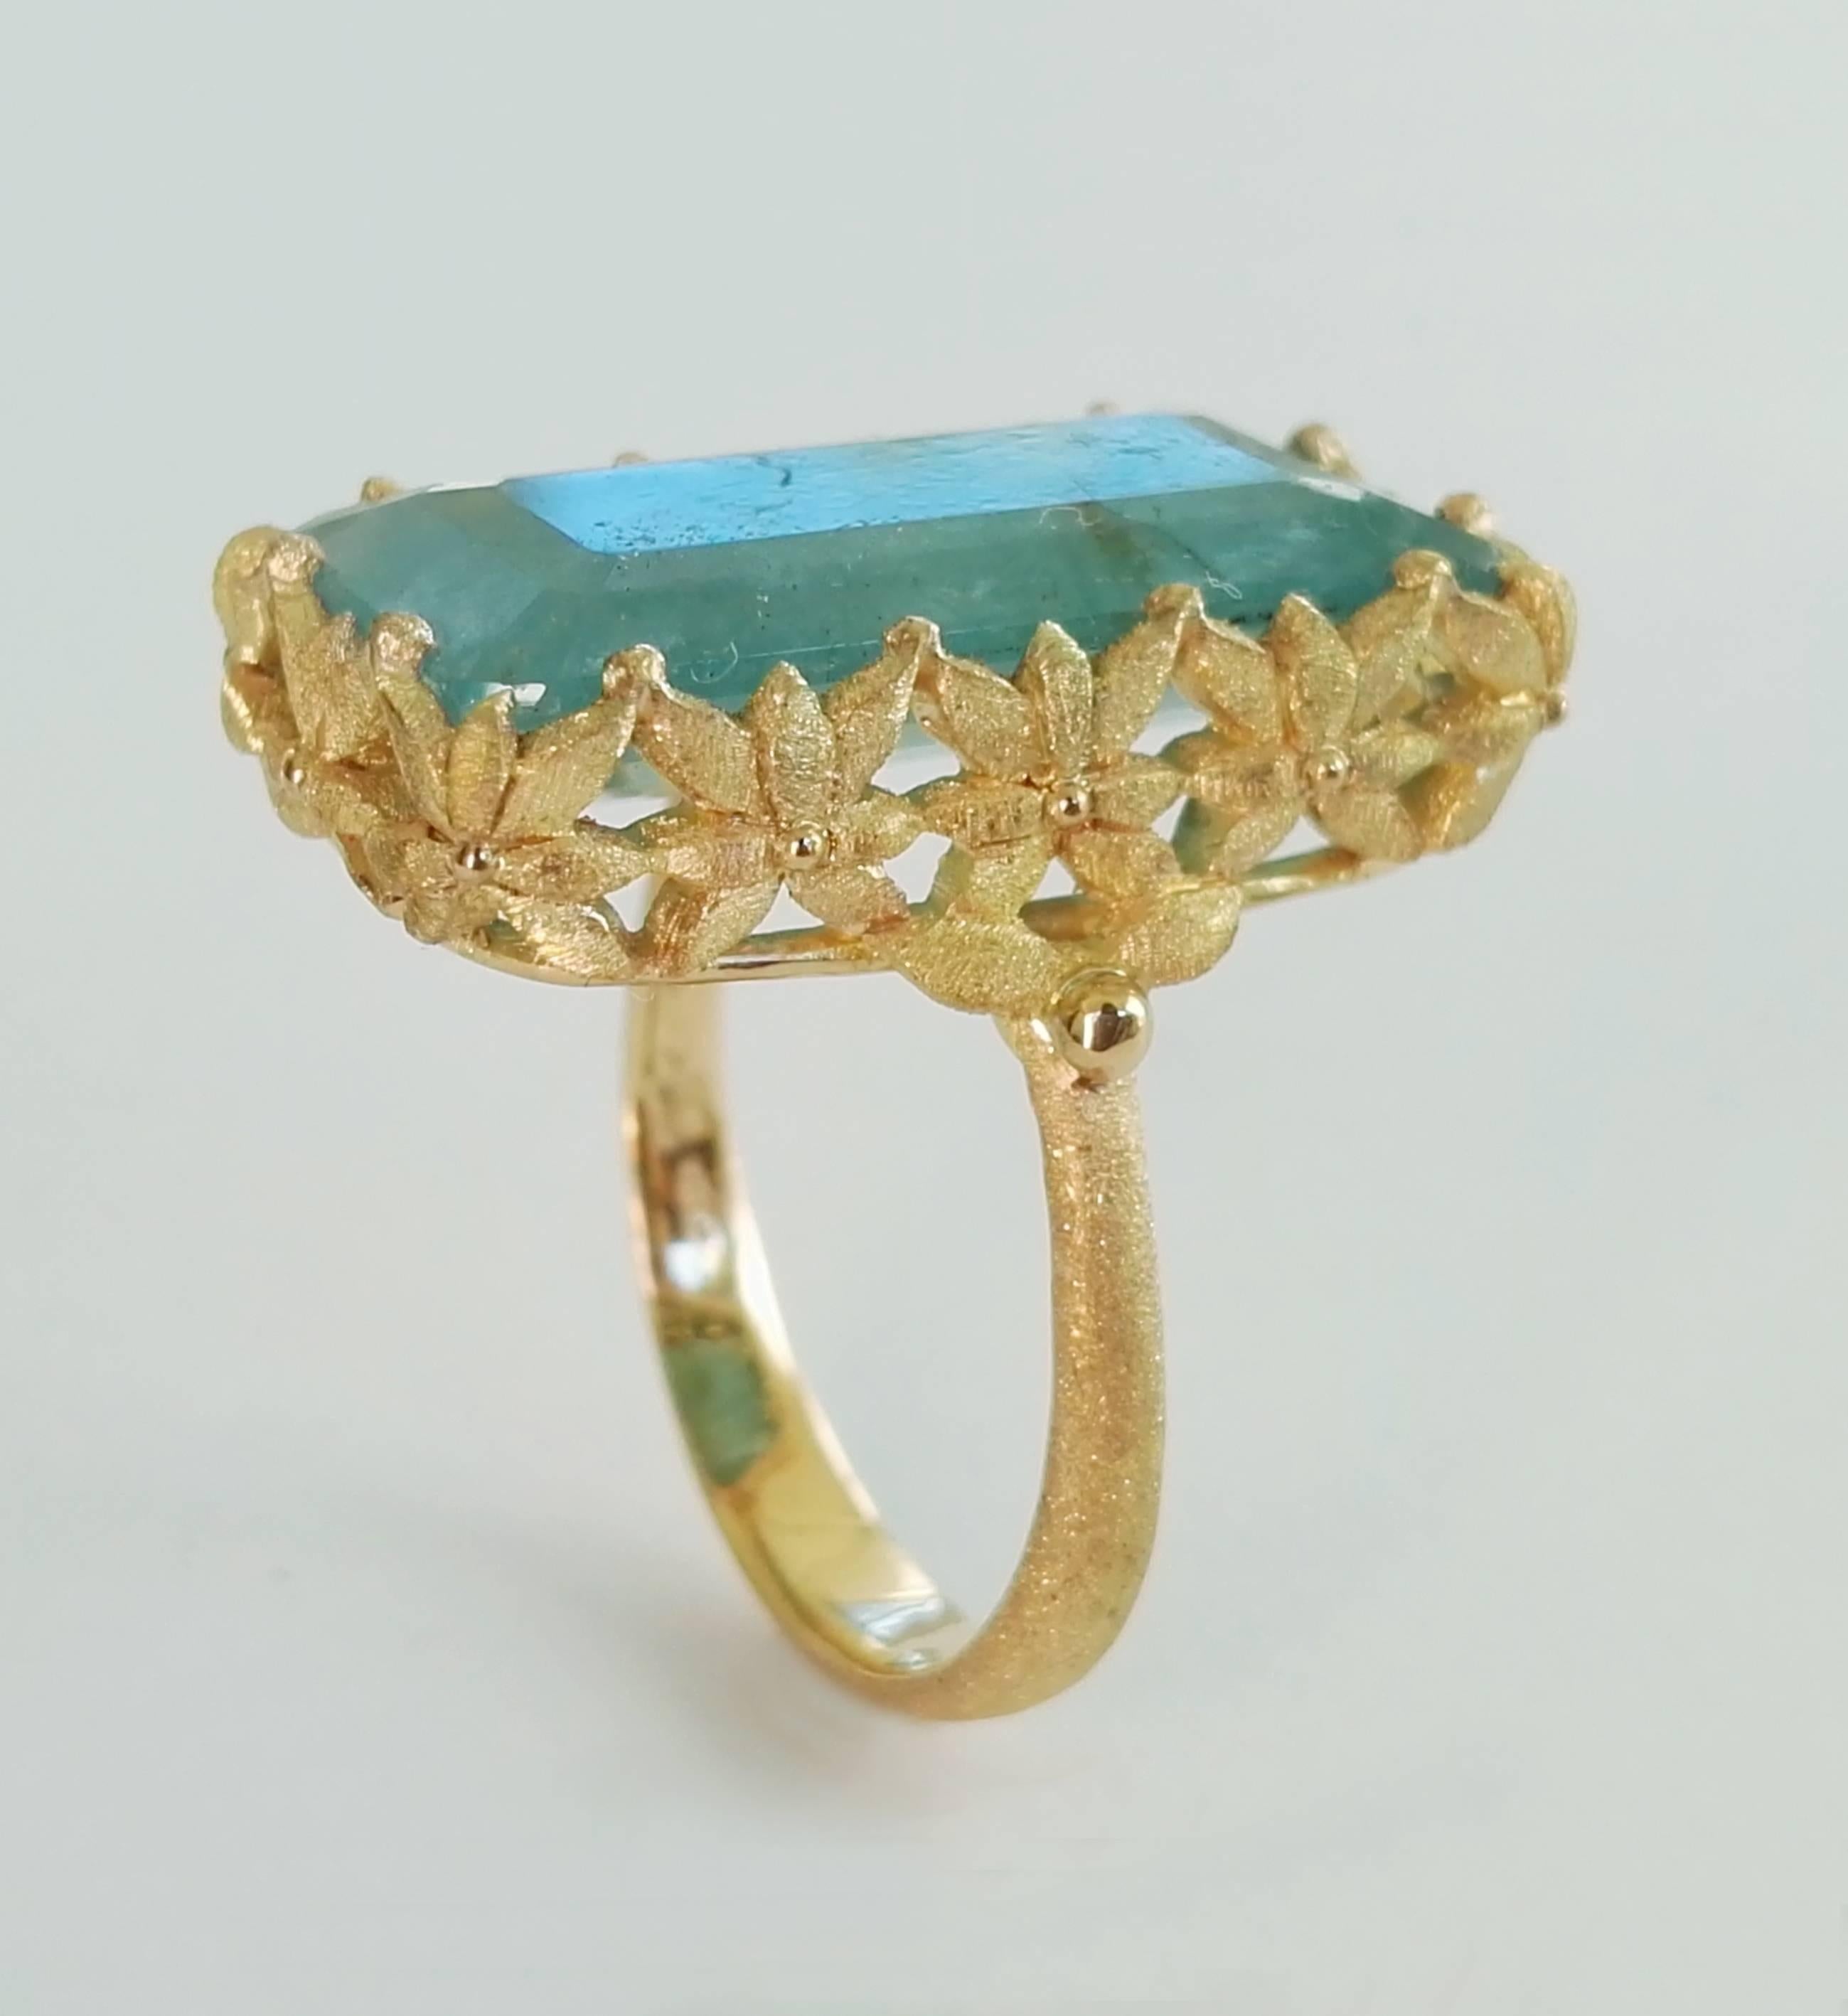 Dalben design 18 kt engraved yellow gold Cocktail Ring with a Rectangular cut Aquamarine weighting 9,10 carat .  Ring size 7 USA - 54 EU resizable to most finger sizes.  The Ring has been designed and handcrafted in our atelier in Italy Como with a